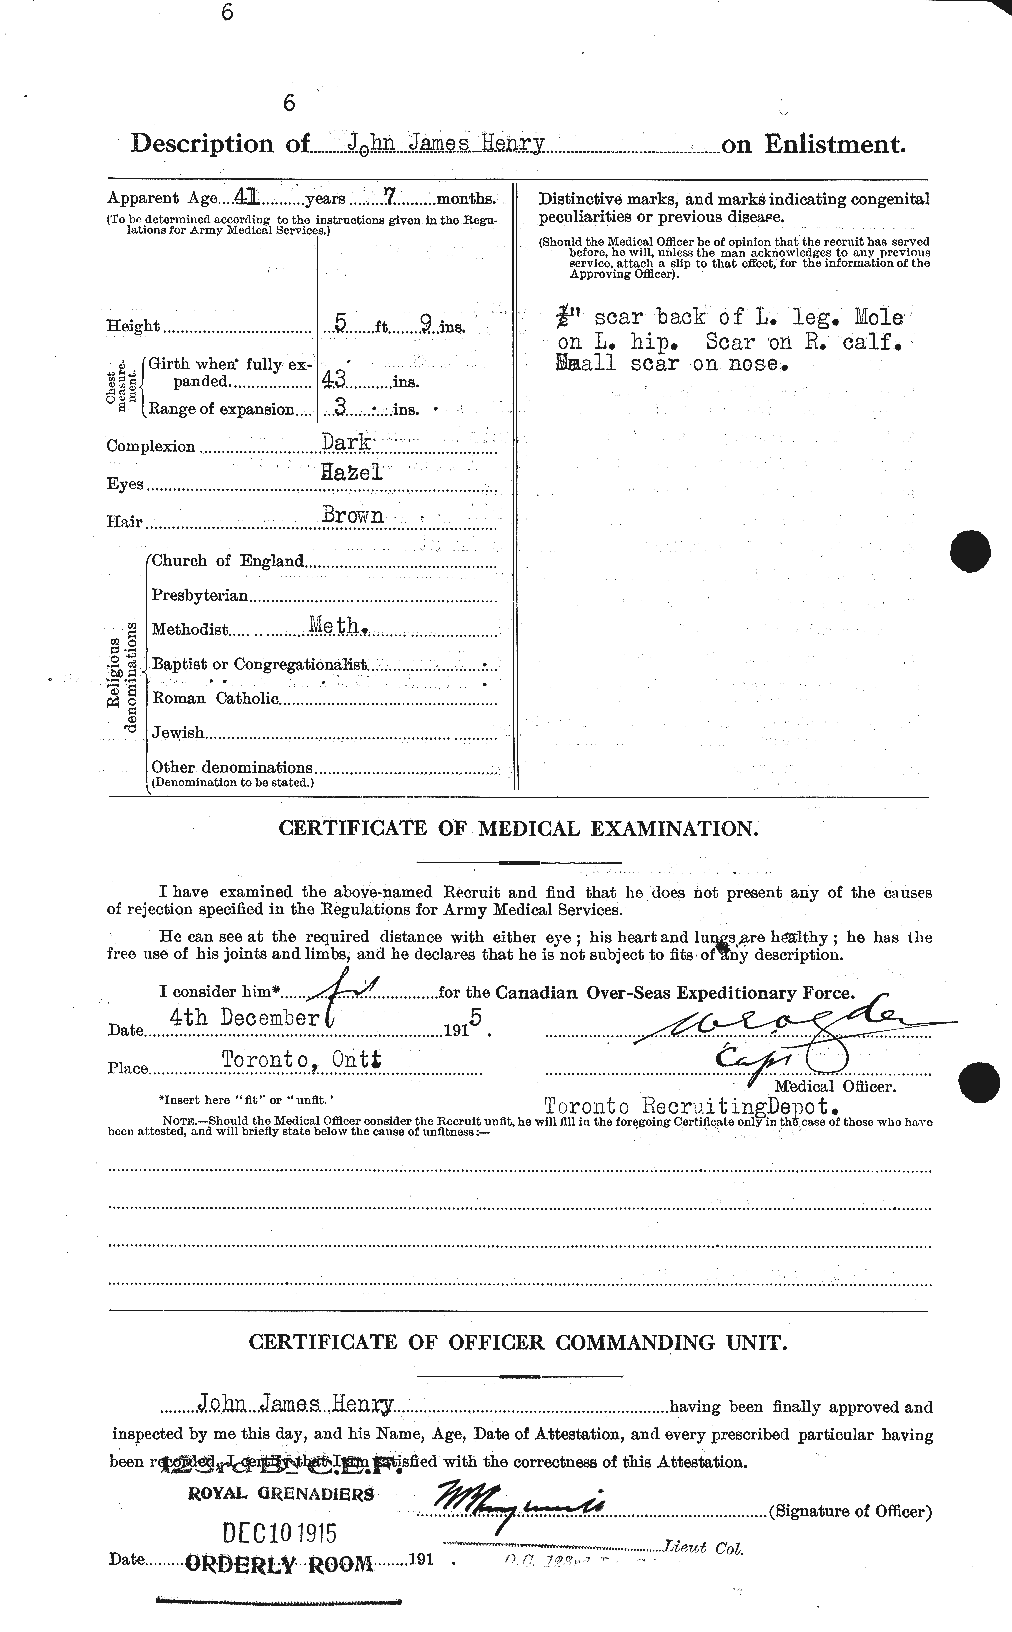 Personnel Records of the First World War - CEF 387625b